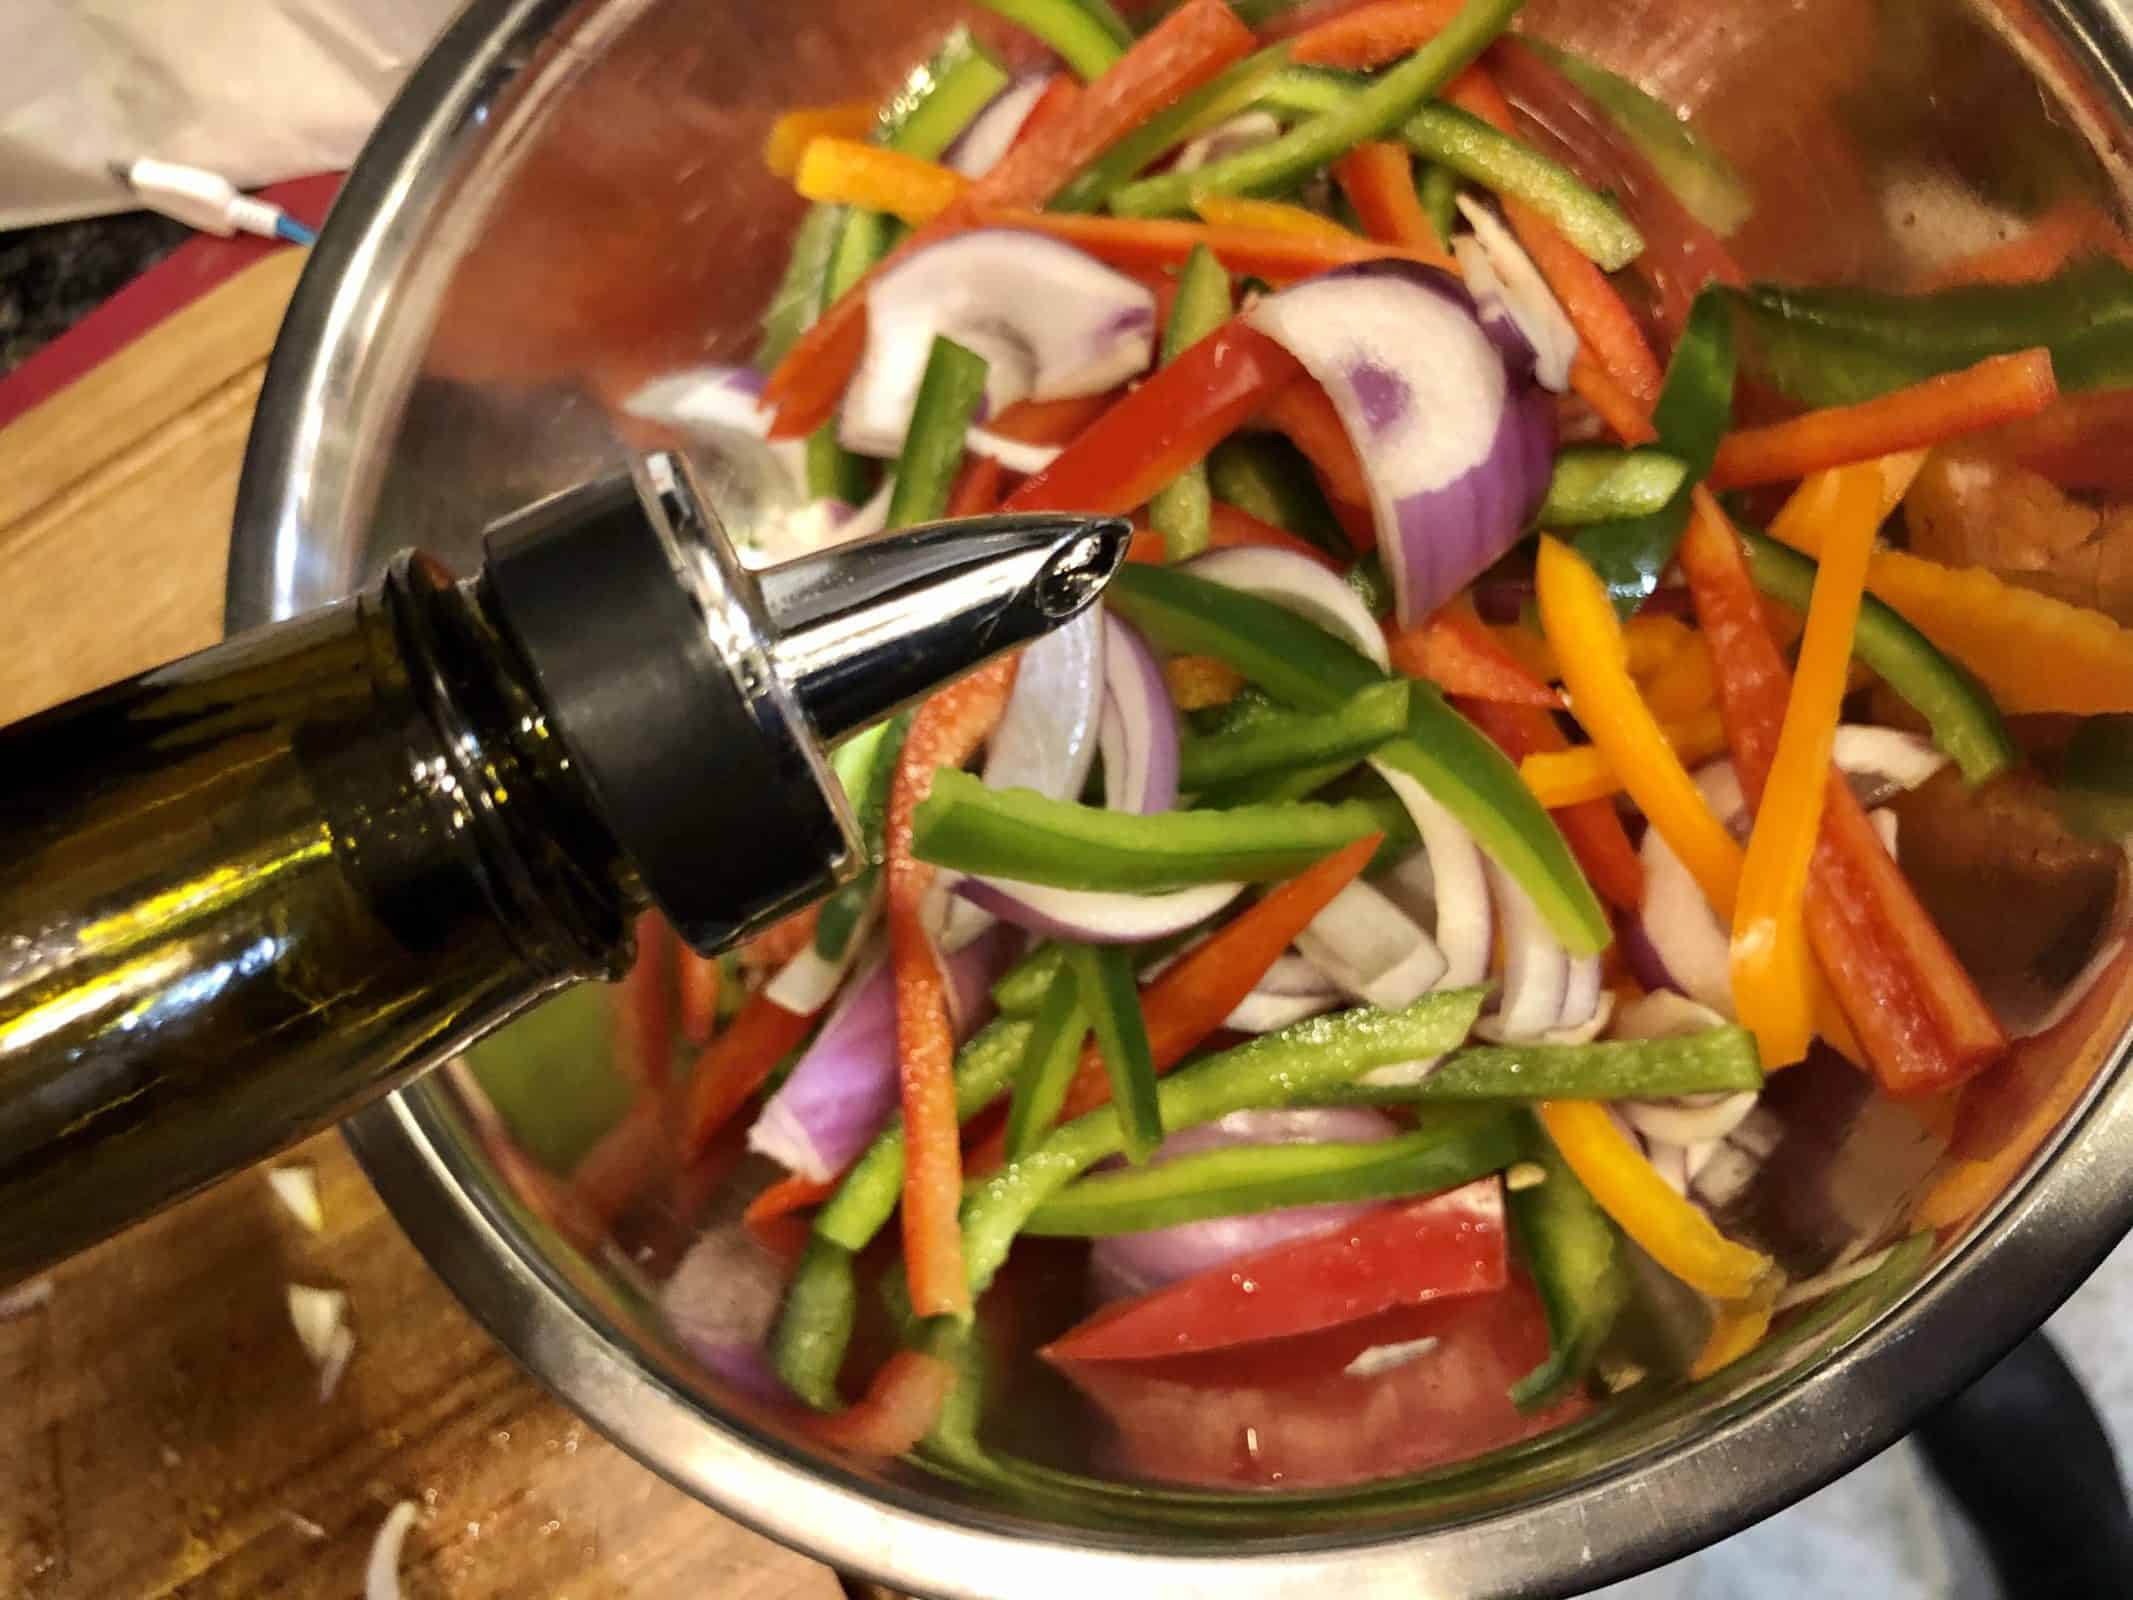 Adding Olive Oil to Peppers and Onions